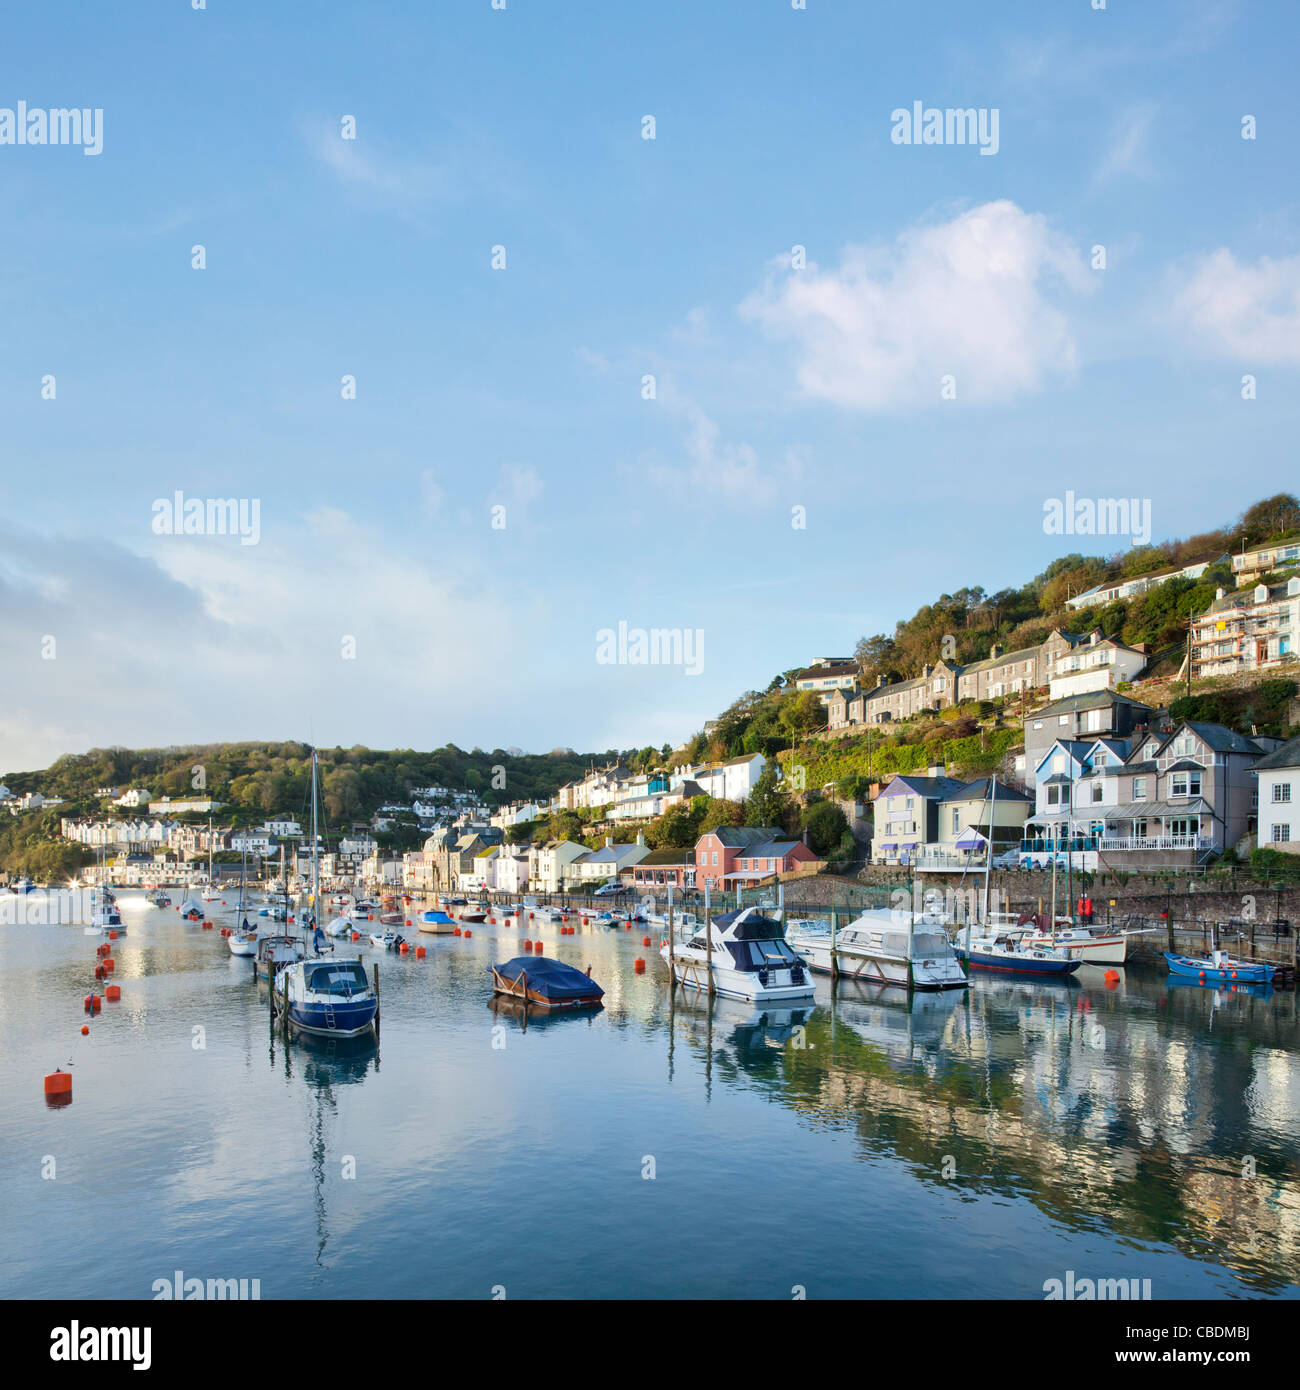 The Cornish seaside town of Looe, on the banks of the River Looe, just after sunrise. Stock Photo